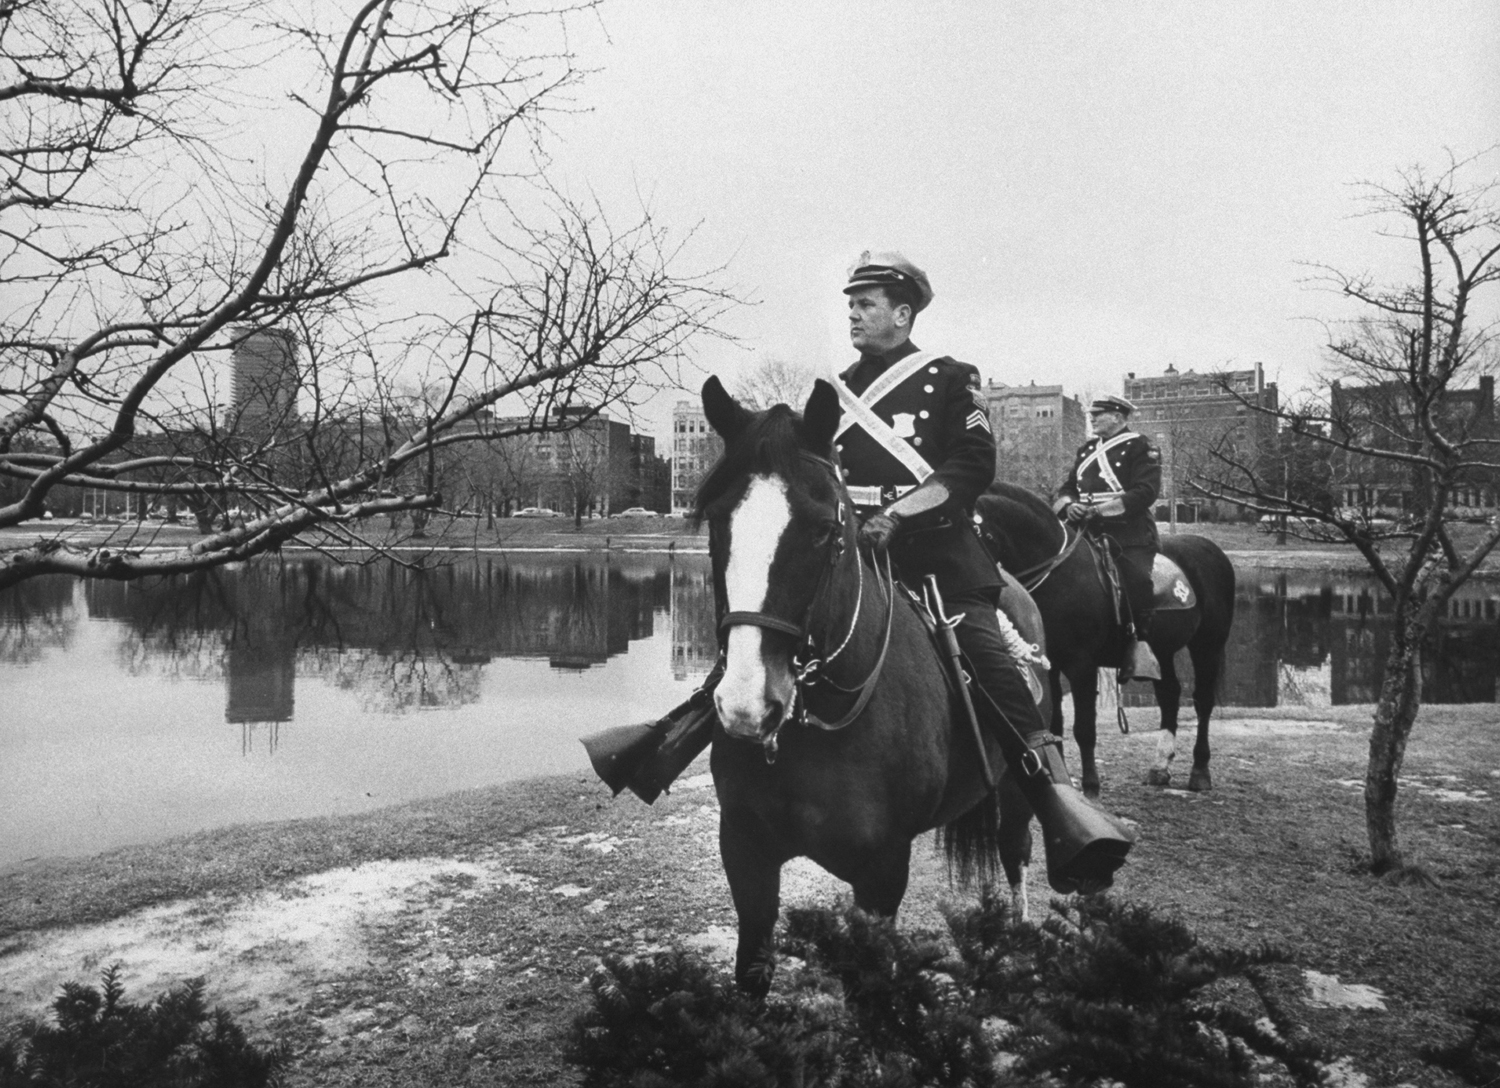 Boston mounted police on patrol in area of stranglings, 1963.